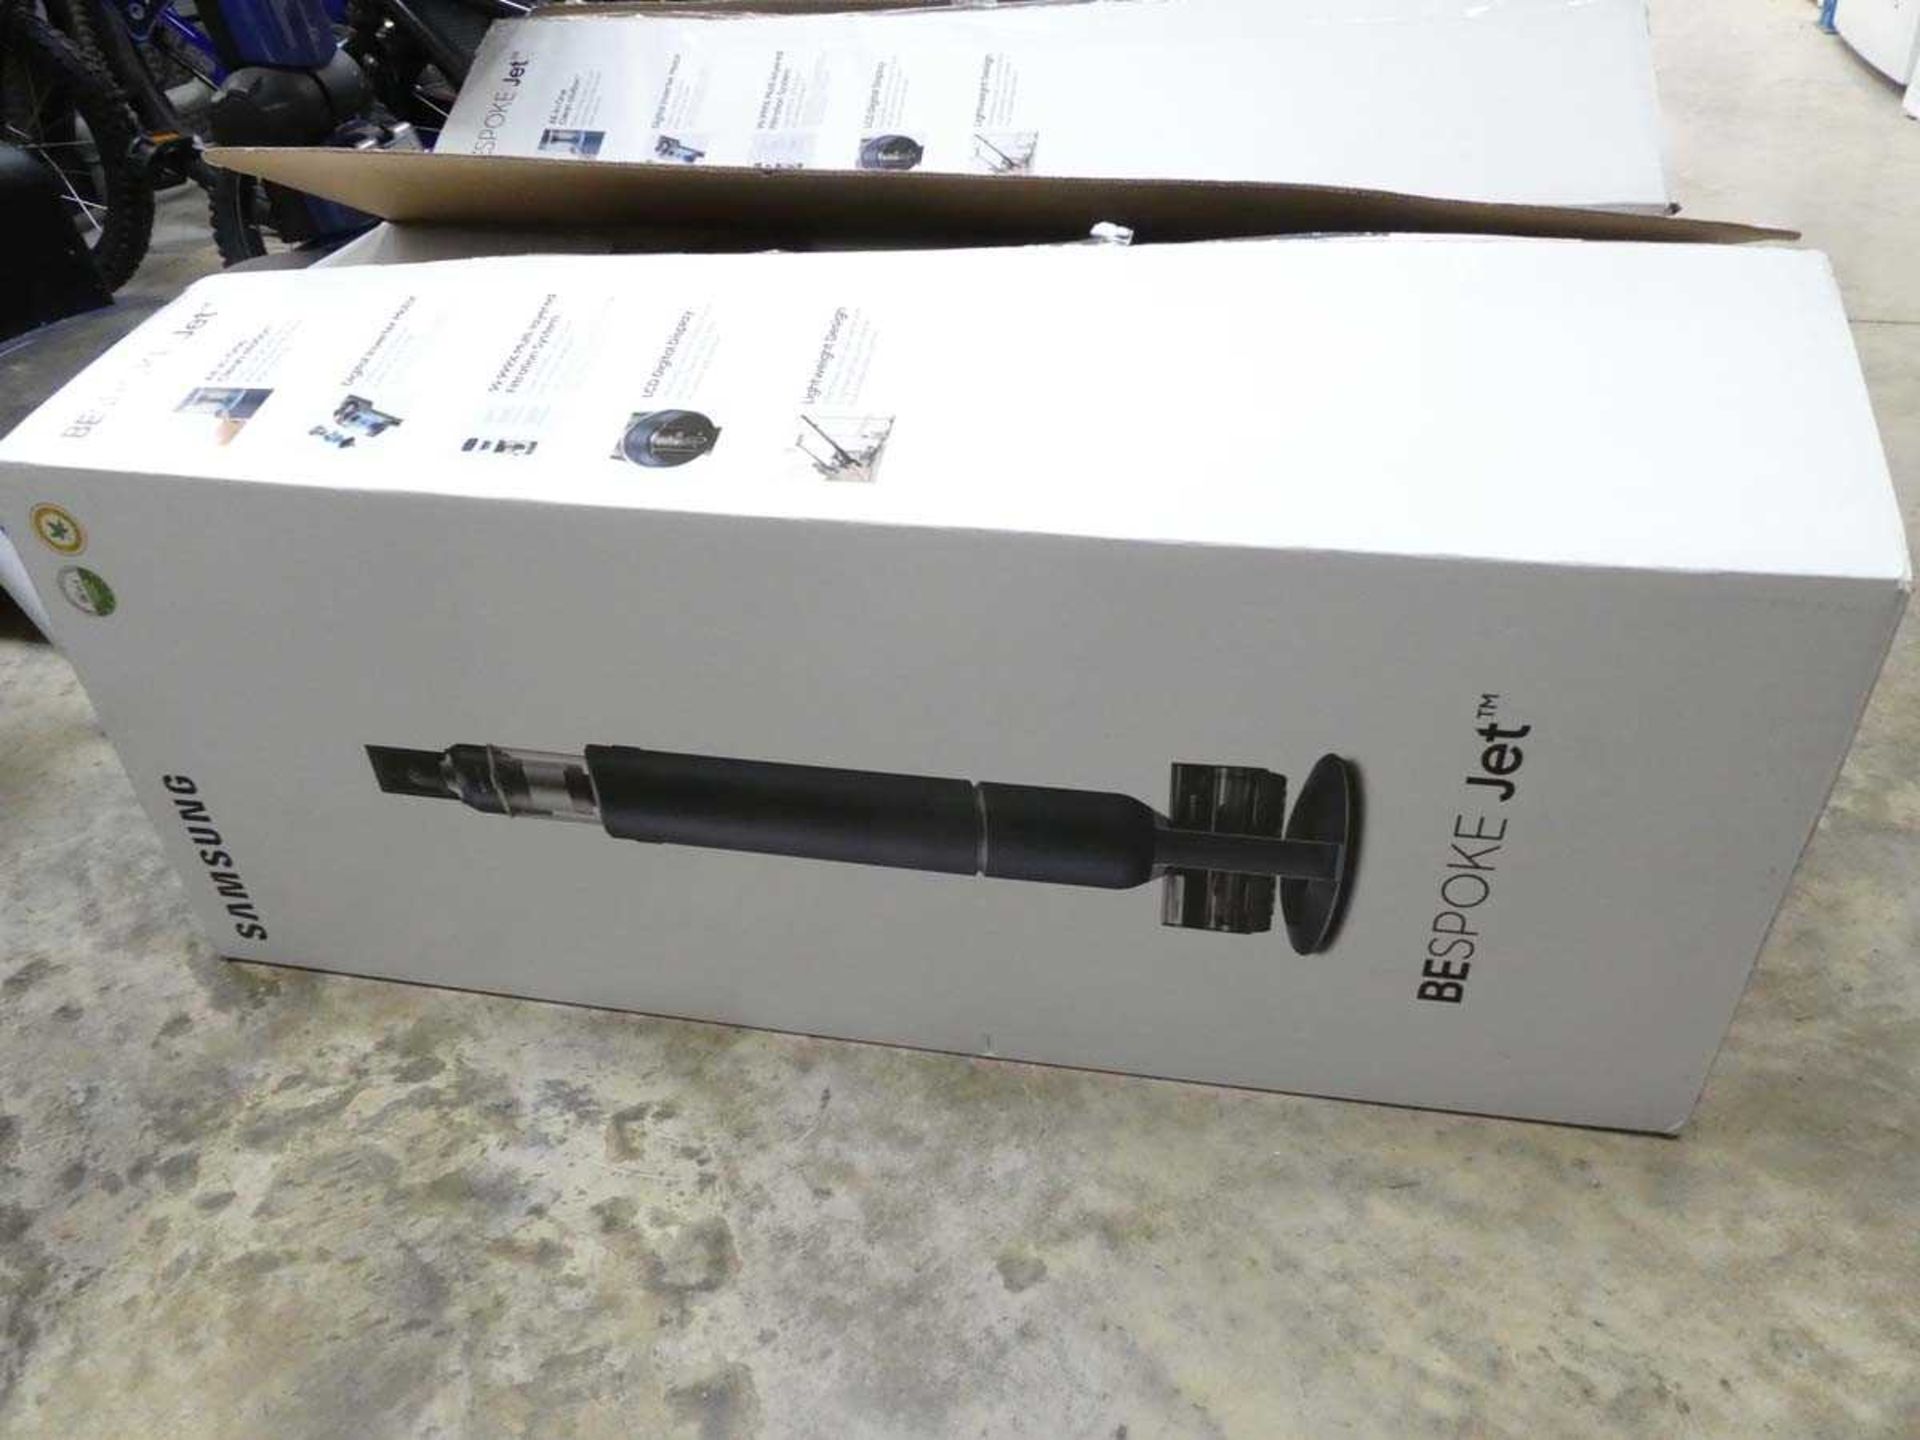 +VAT Boxed Samsung Bespoke Jet vacuum cleaner with battery and accessories